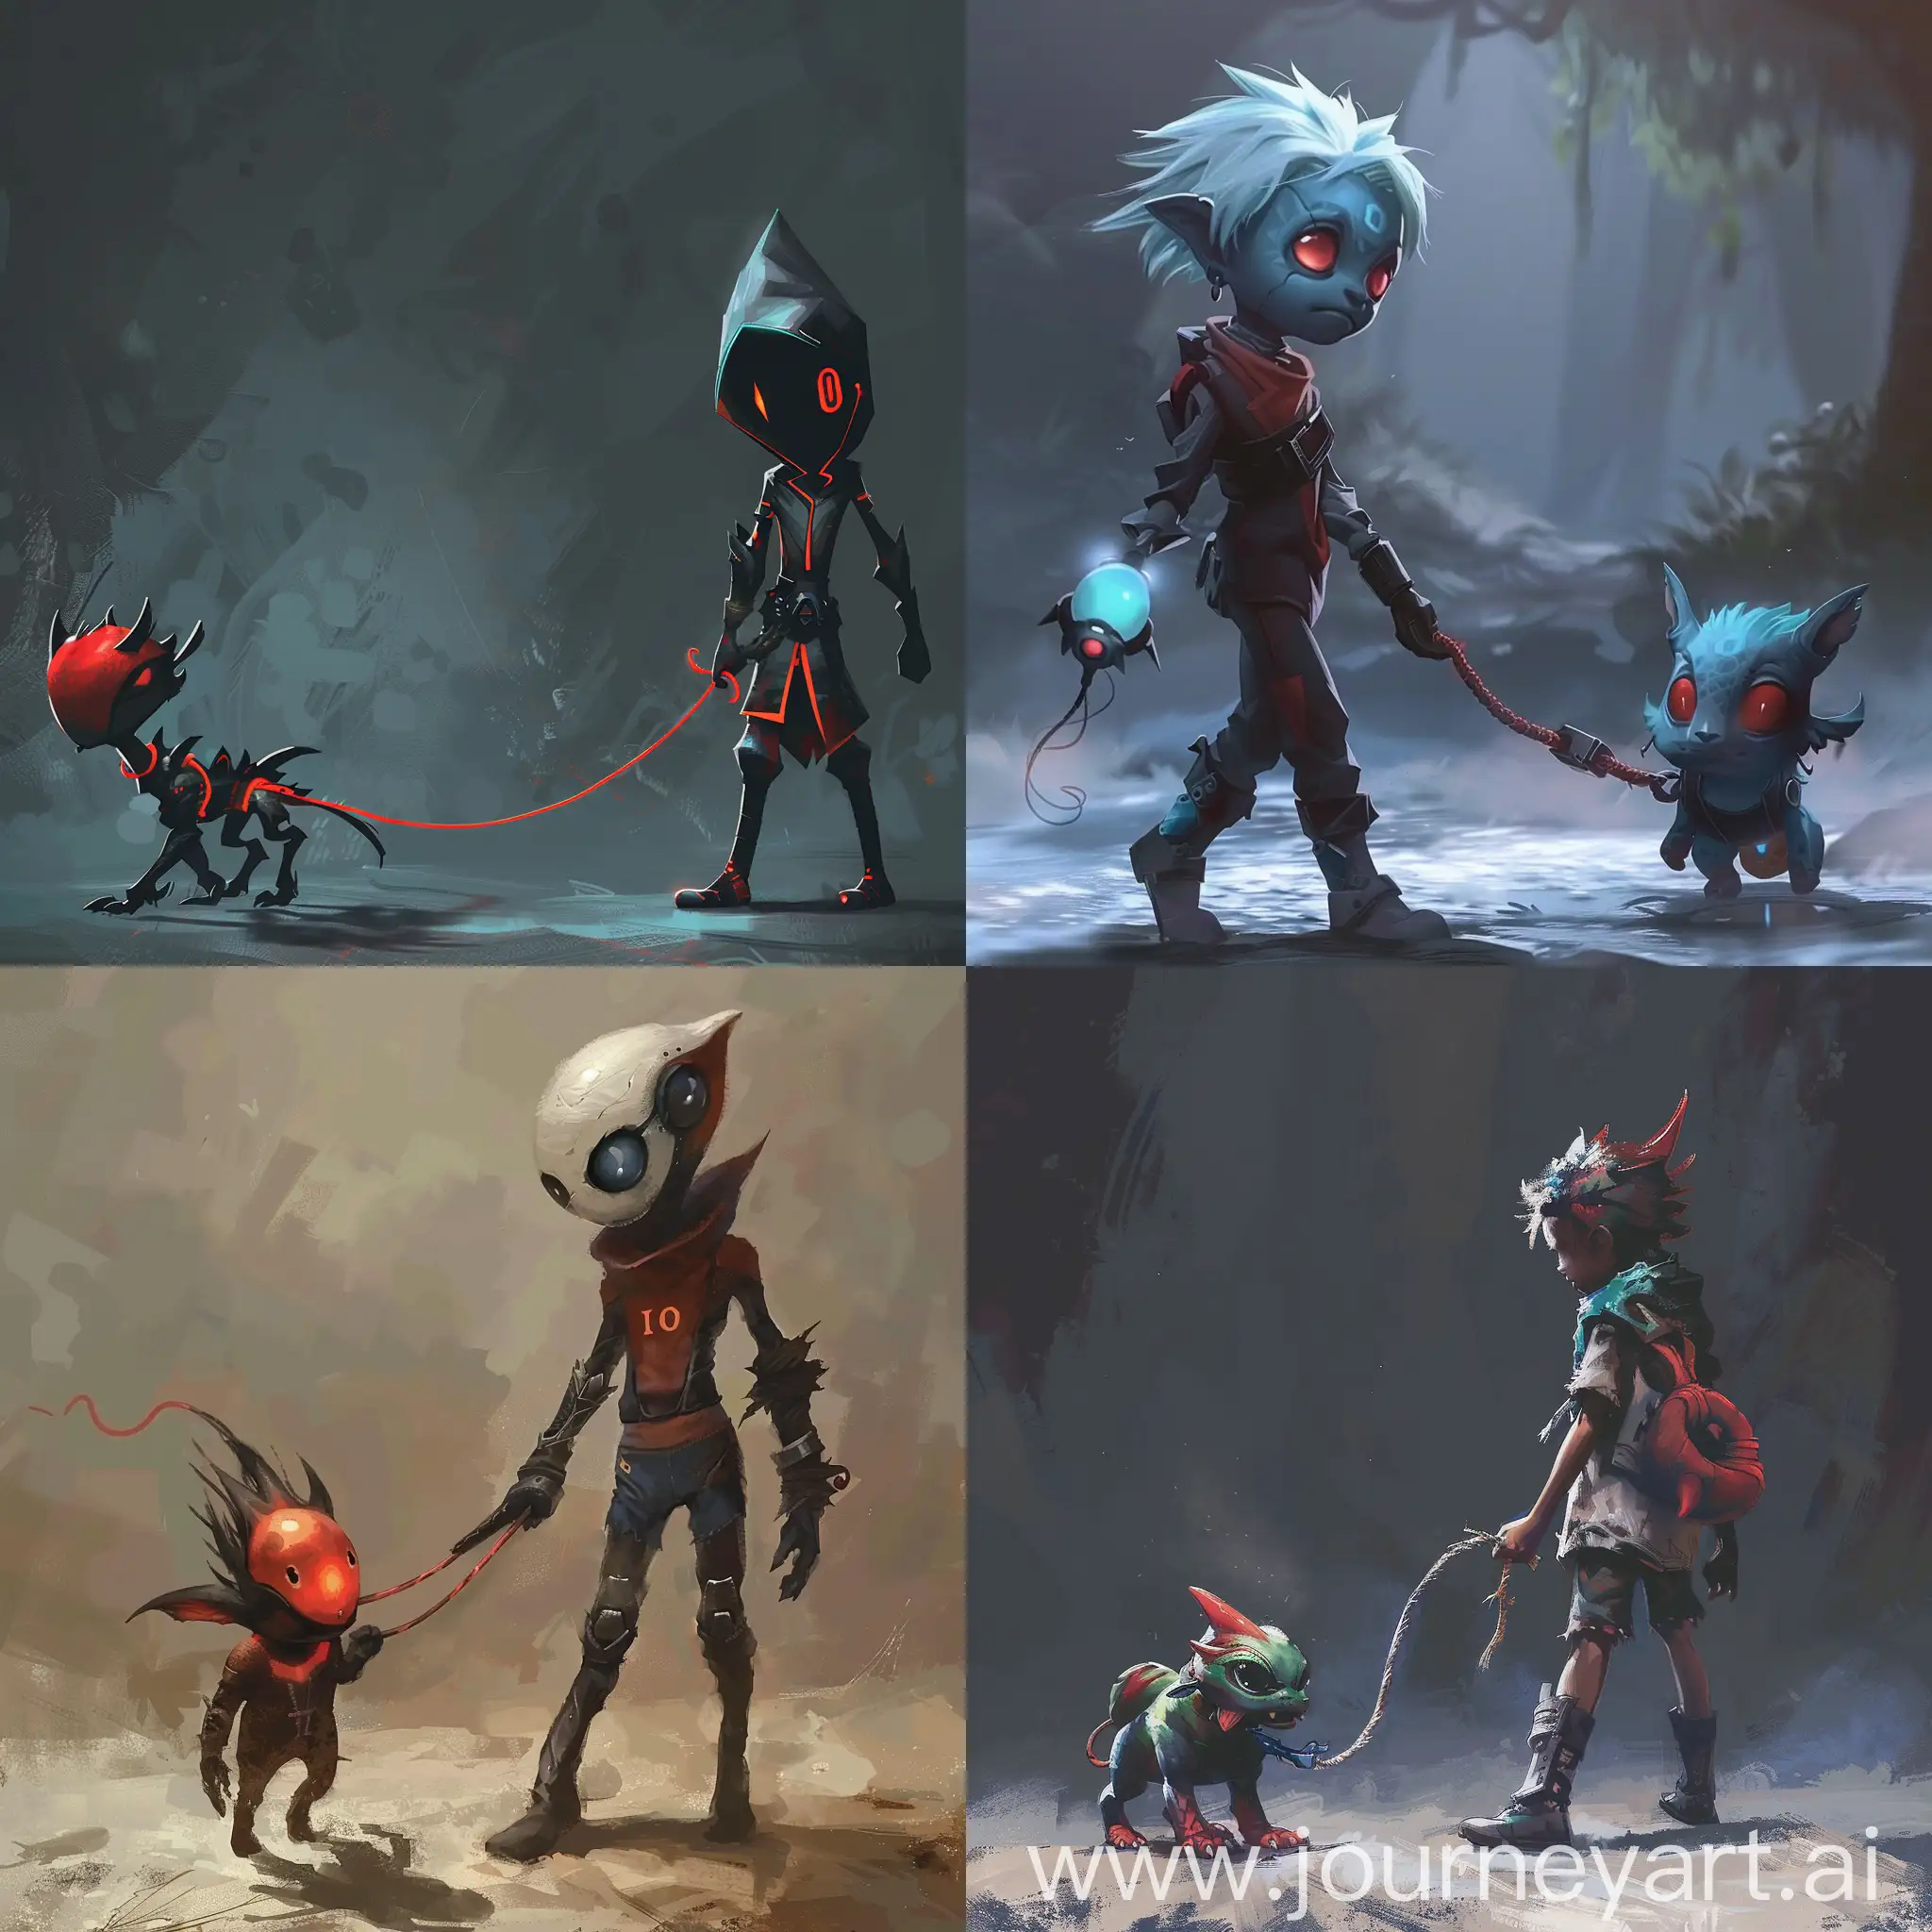 The character IO from Dota 2 walks a lifestealer on a leash